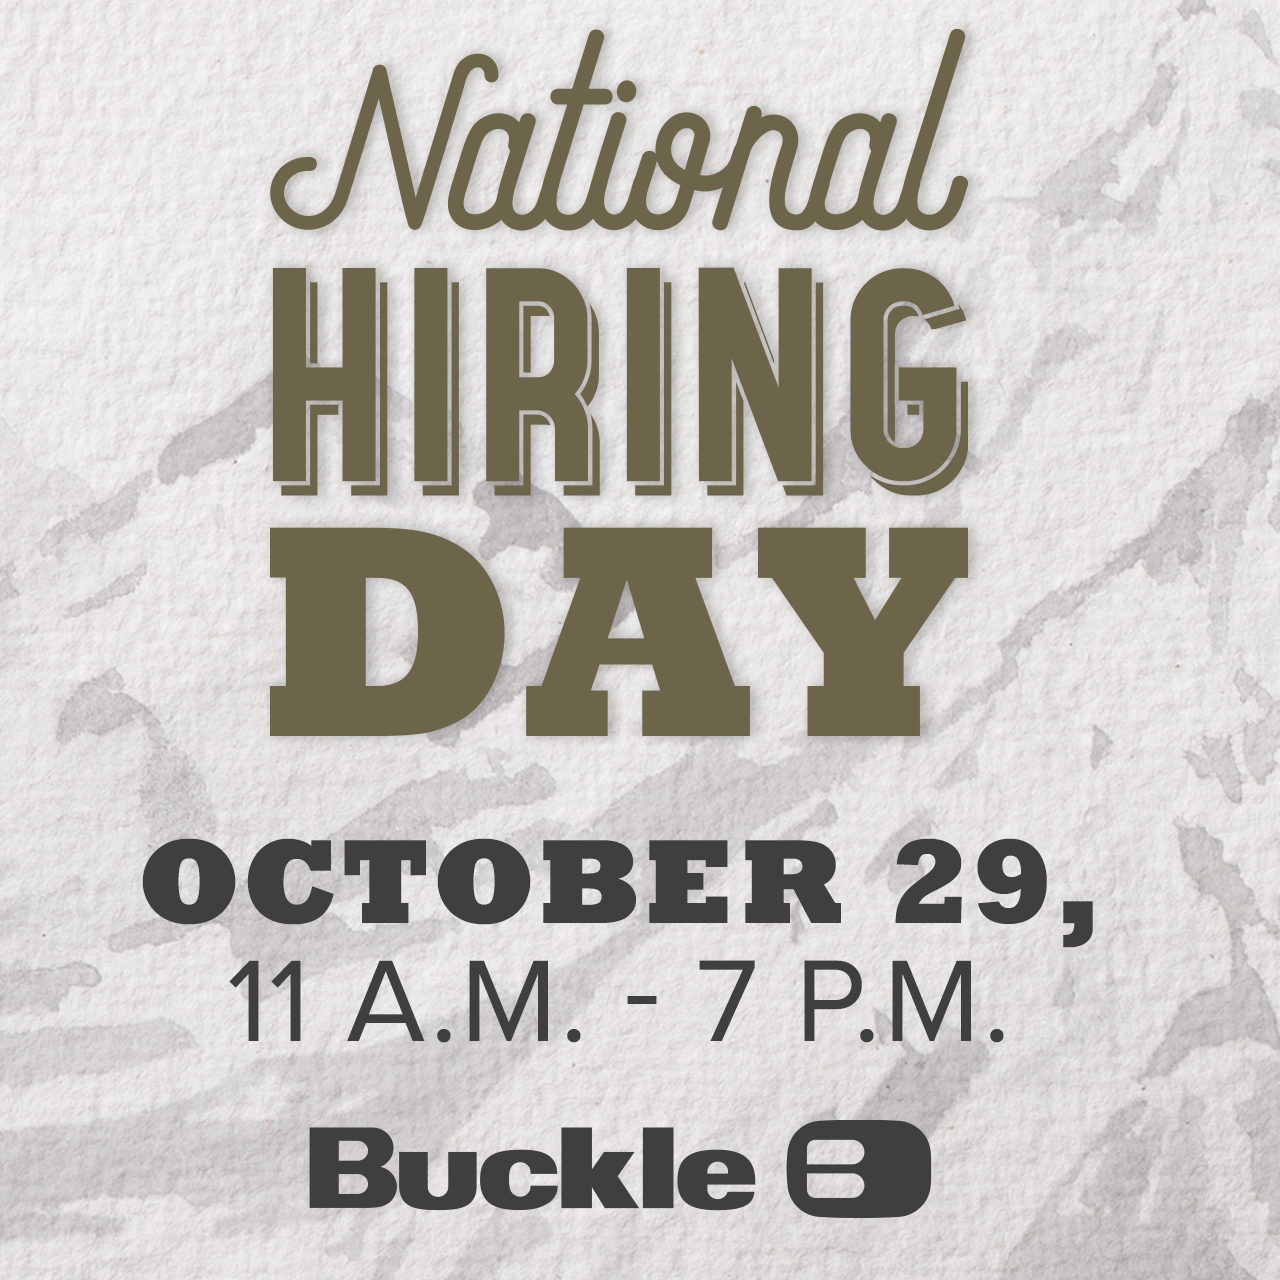 National Hiring Day is Here! Destiny USA